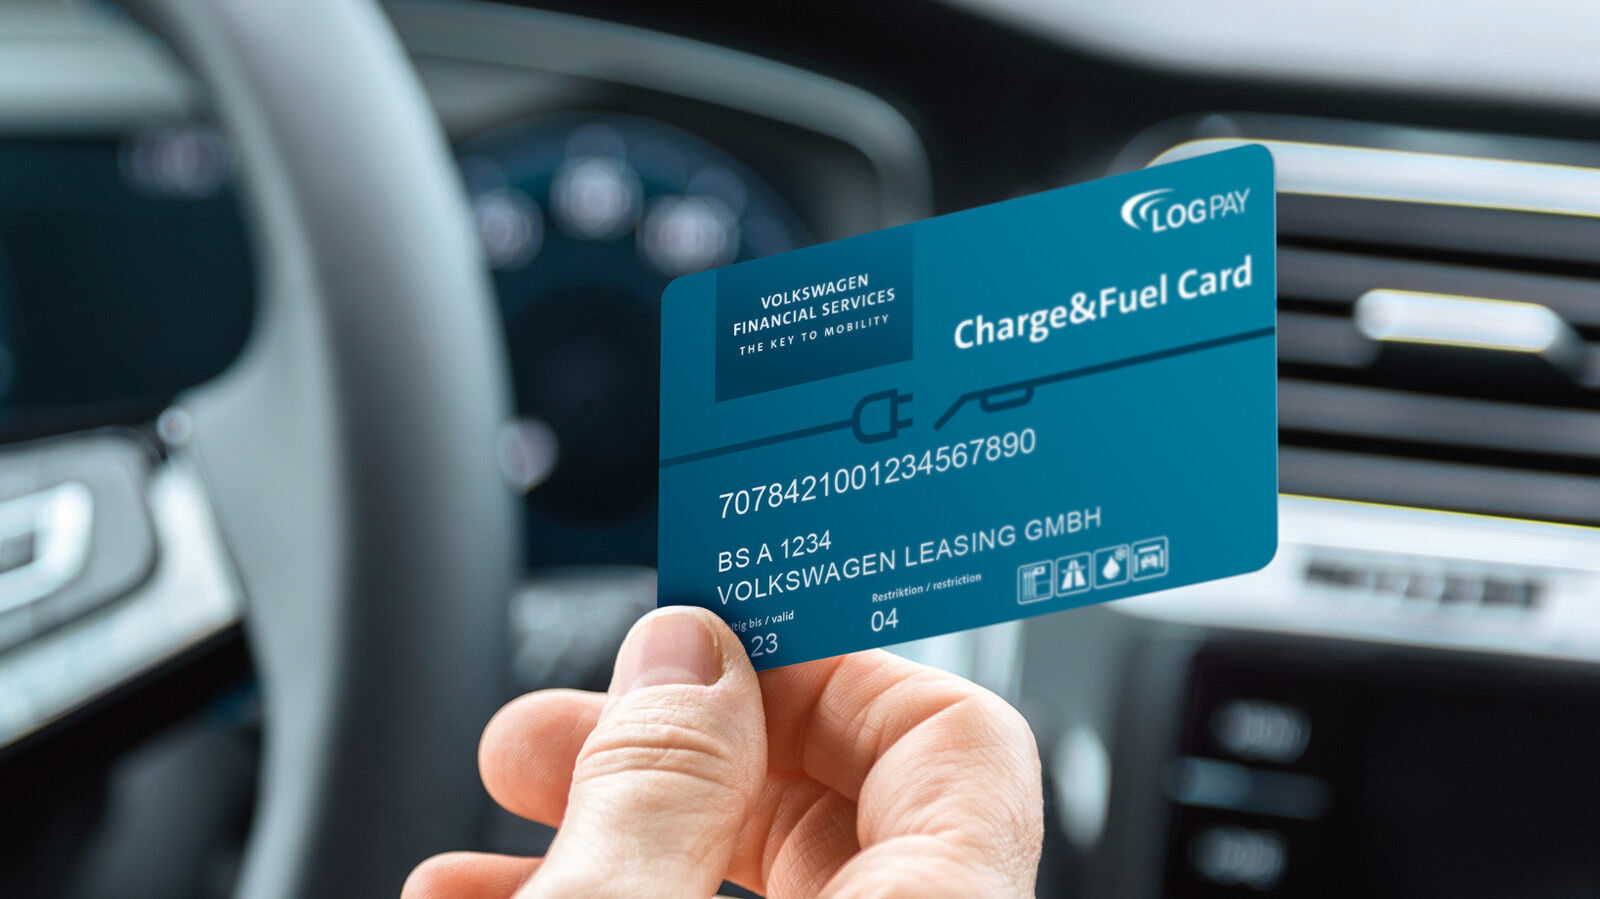 Charge&Fuel Card